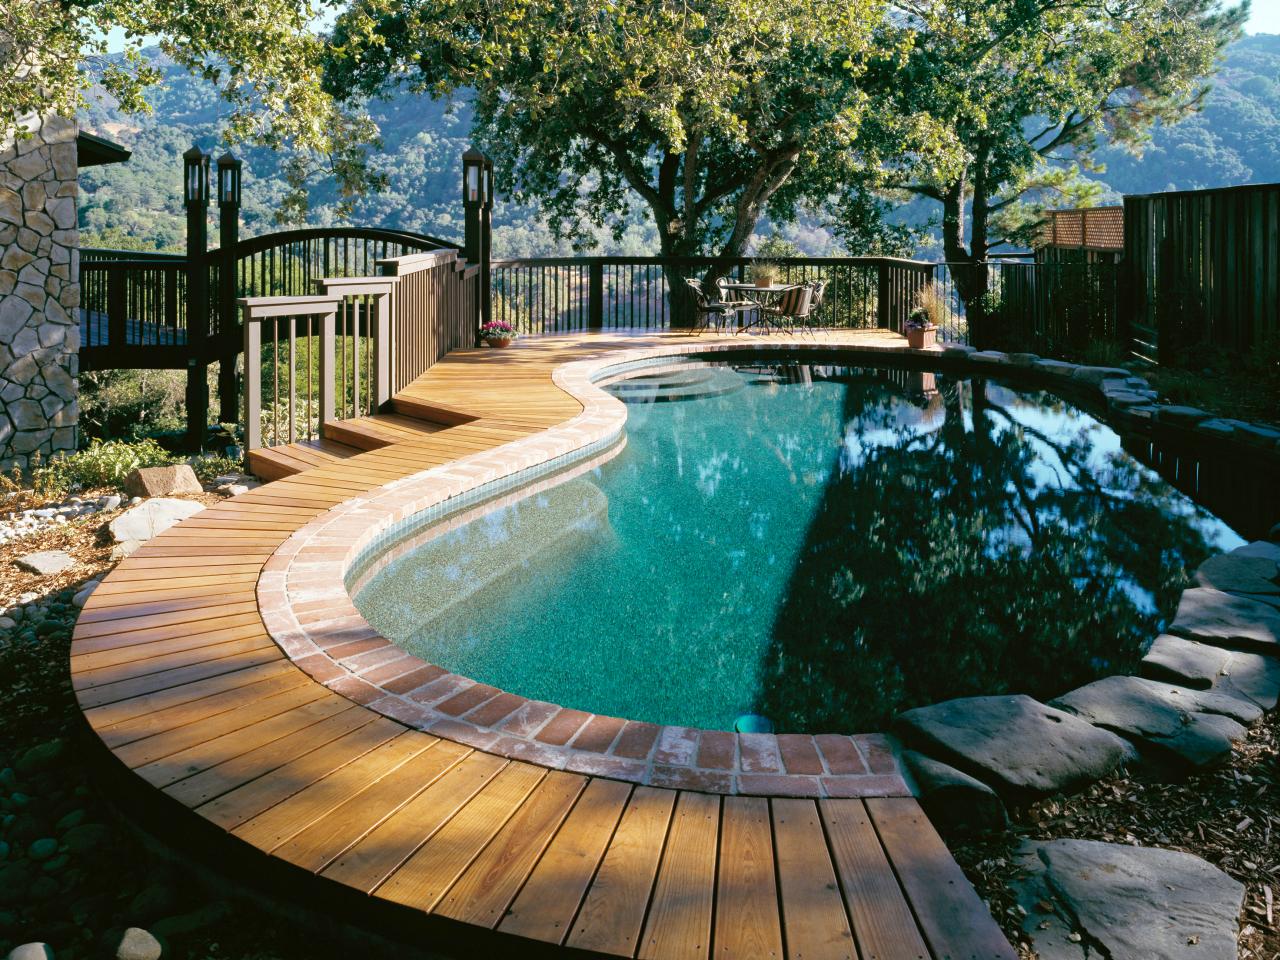 Pool Deck Designs And Options Diy, Pool Deck Ideas For Inground Pools